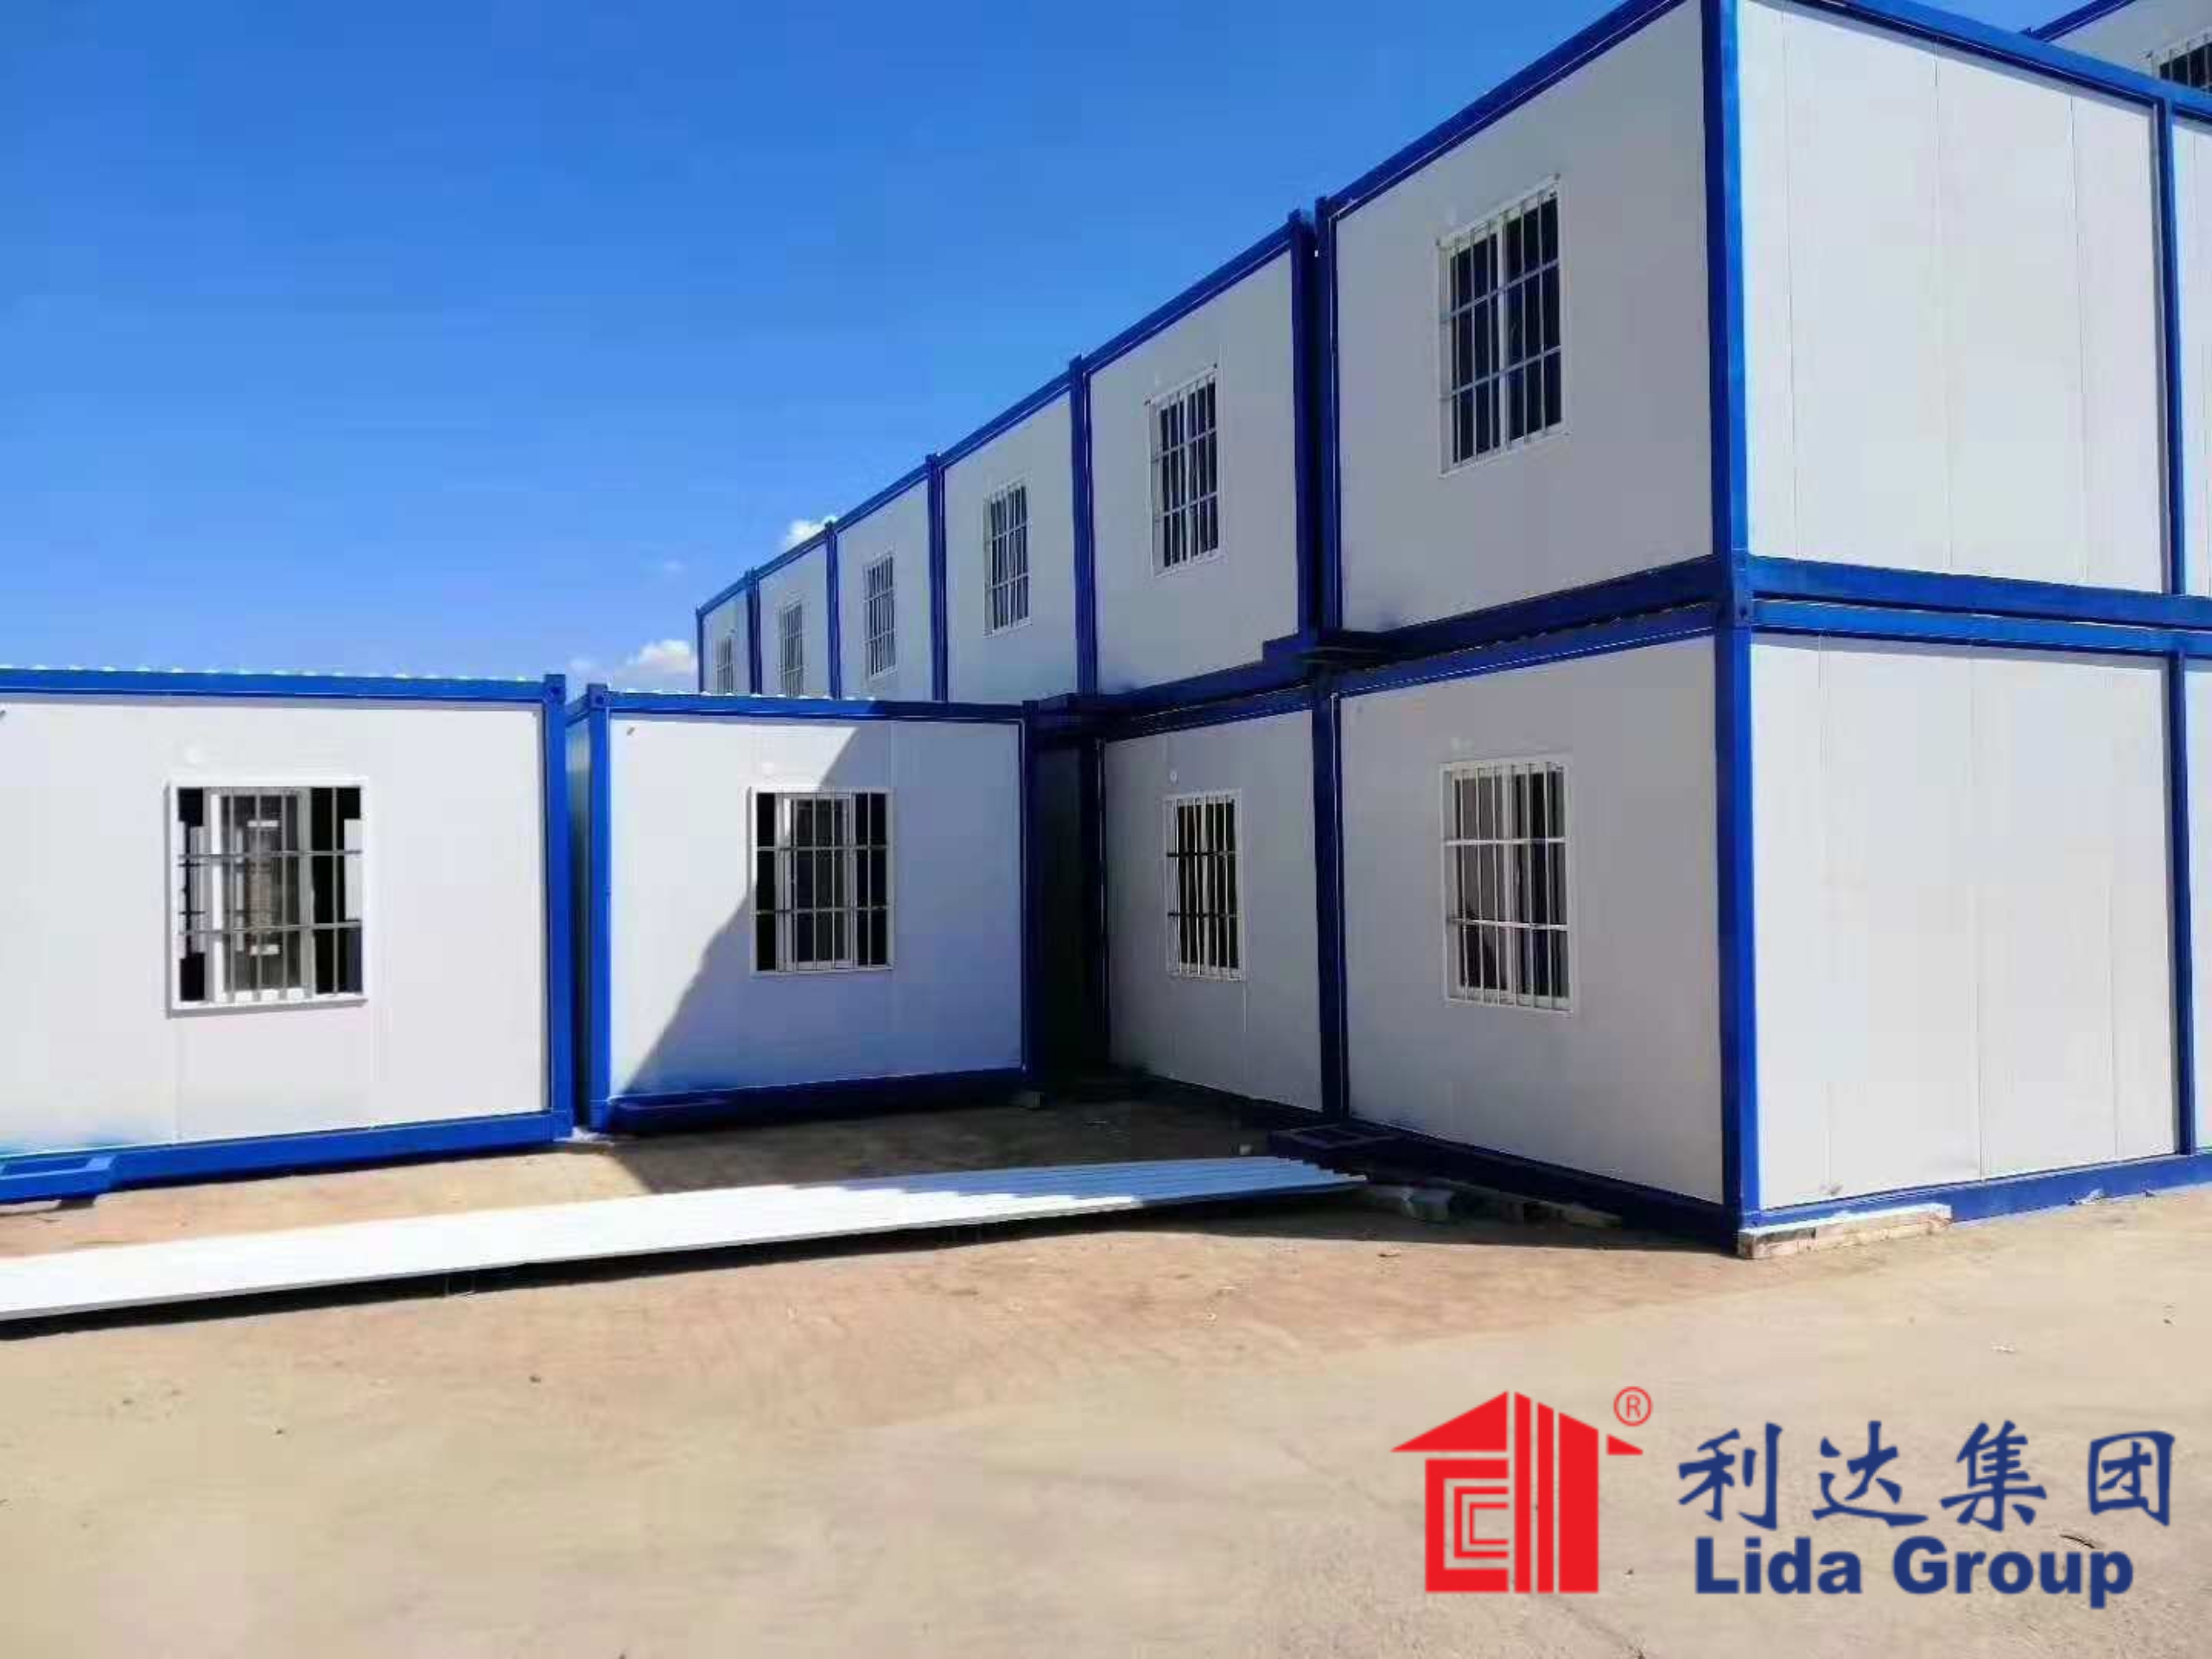 New research collaboartion between Lida Group and university exploring ways to optimize design and assembly of multifamily apartments constructed using recycled steel shipping containers aims to radically reduce costs of urban housing